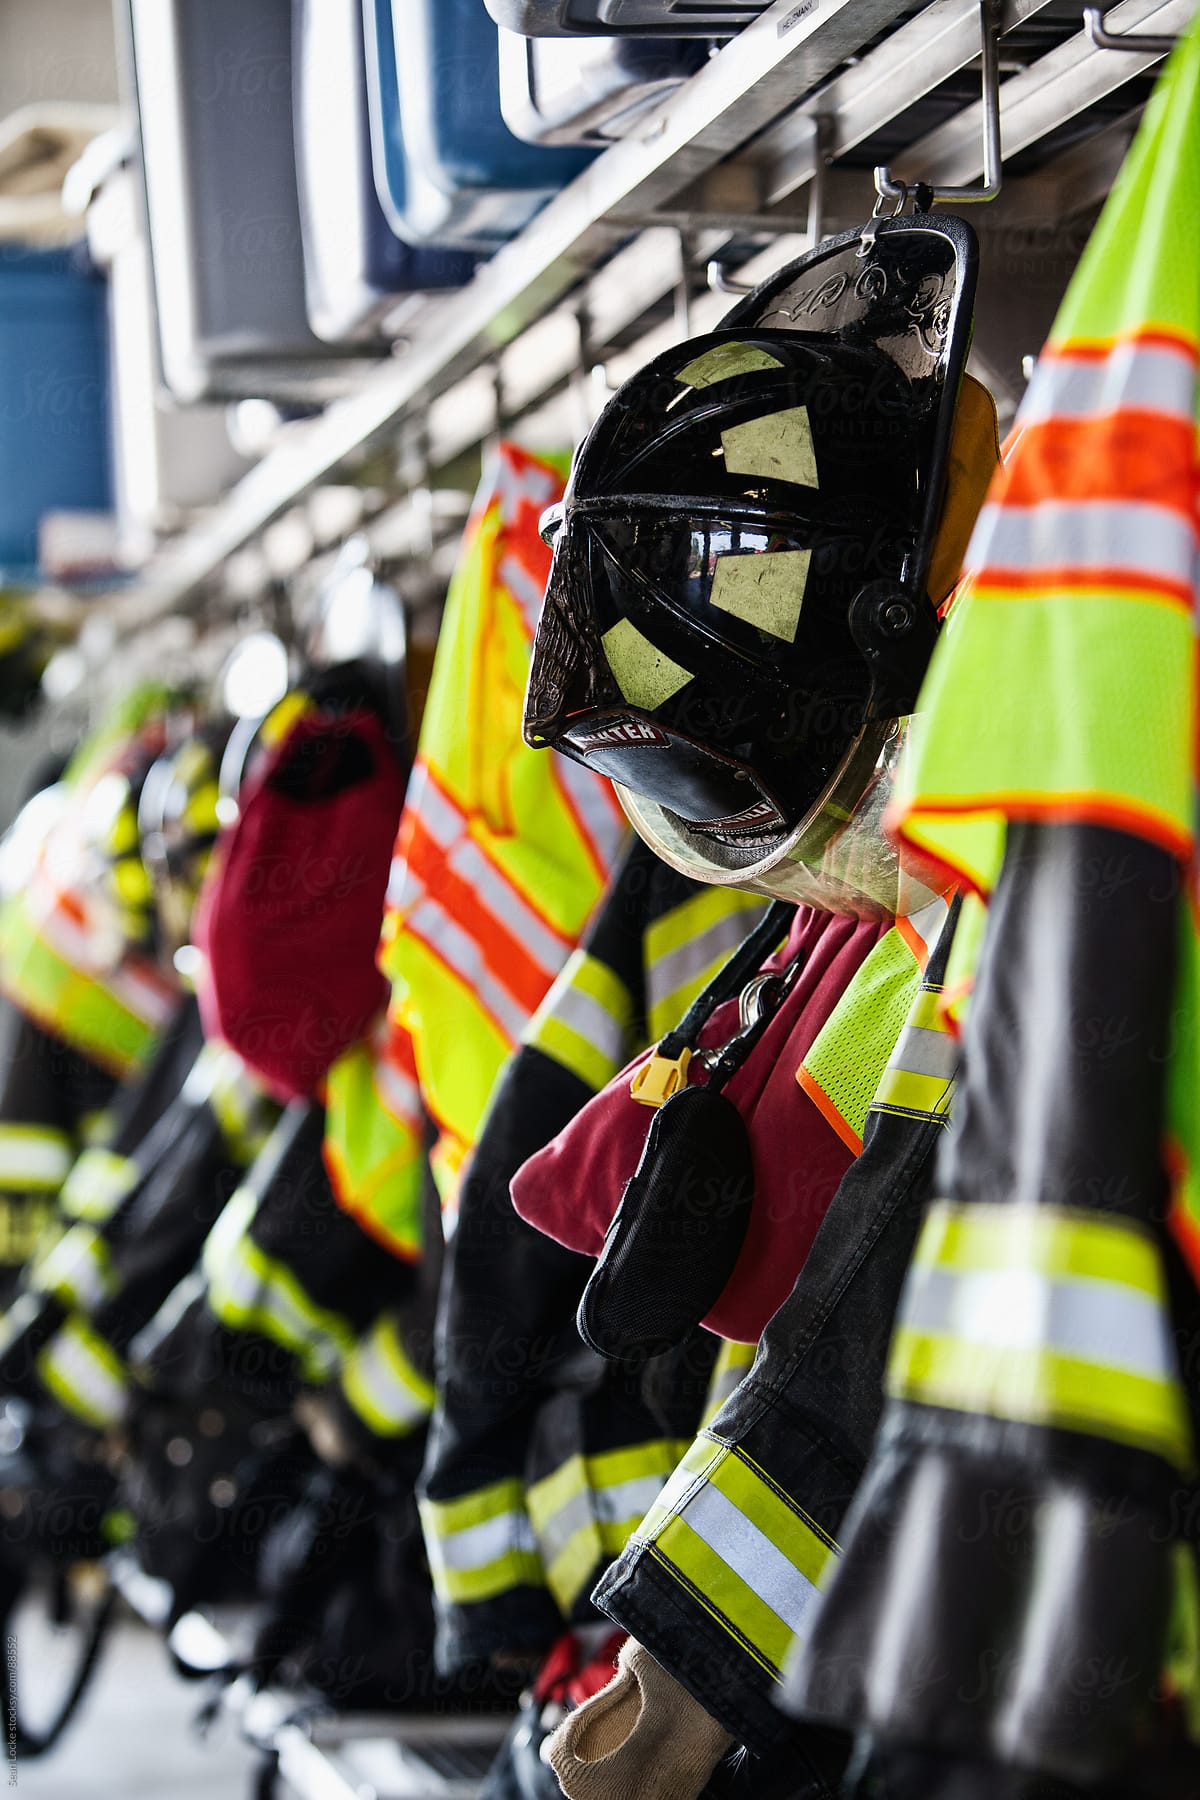 Firehouse: Fire Fighter Gear Hanging On Rack